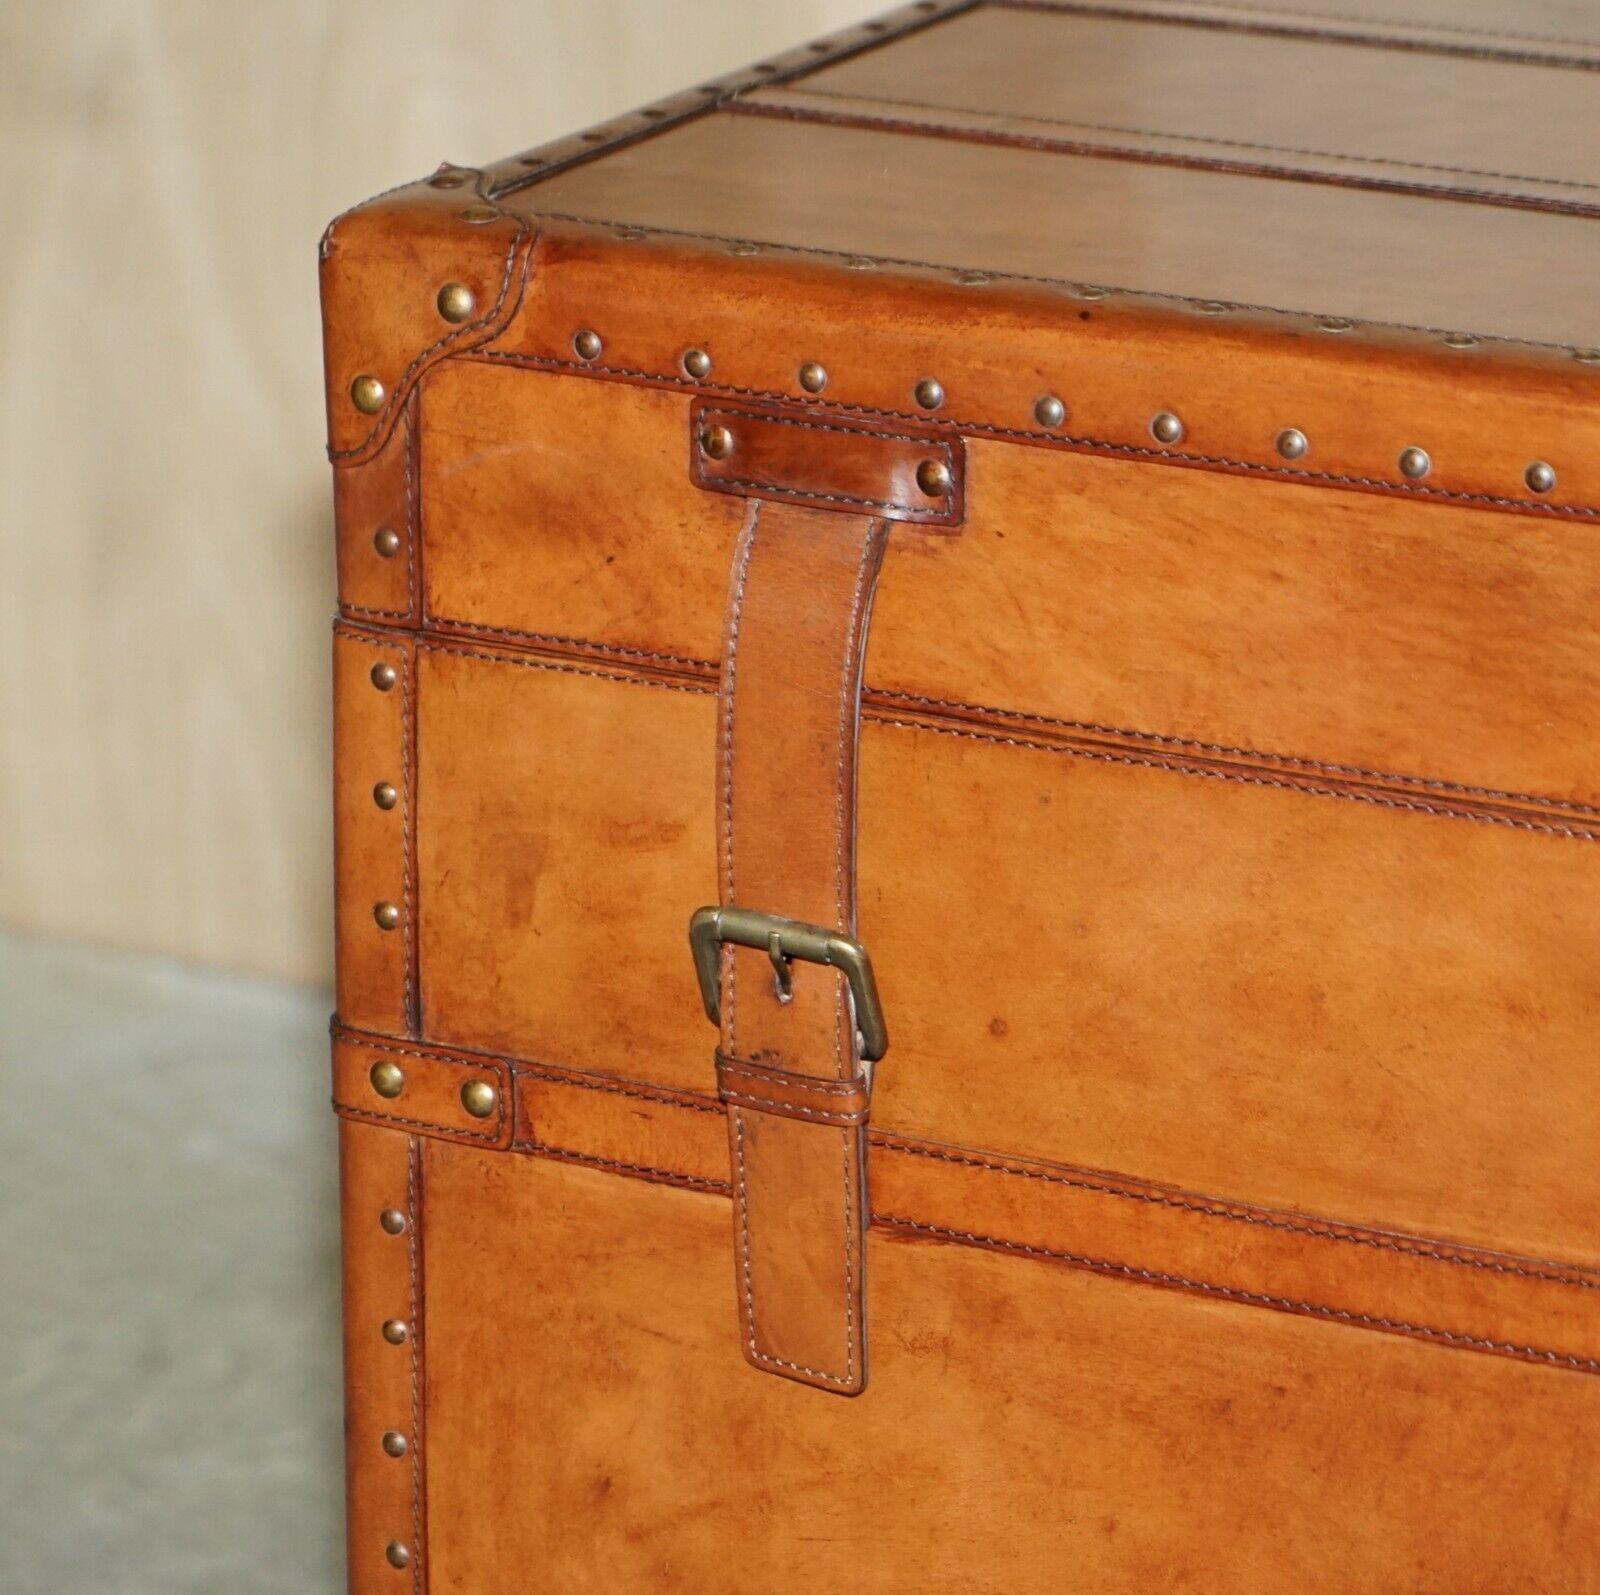 We are delighted to offer for sale this lovely vintage brown leather steamer storage trunk or chest

A good looking and very decorative chest, ideally suited for storing linens or as a coffee table, I can have a glass top made if the new owners